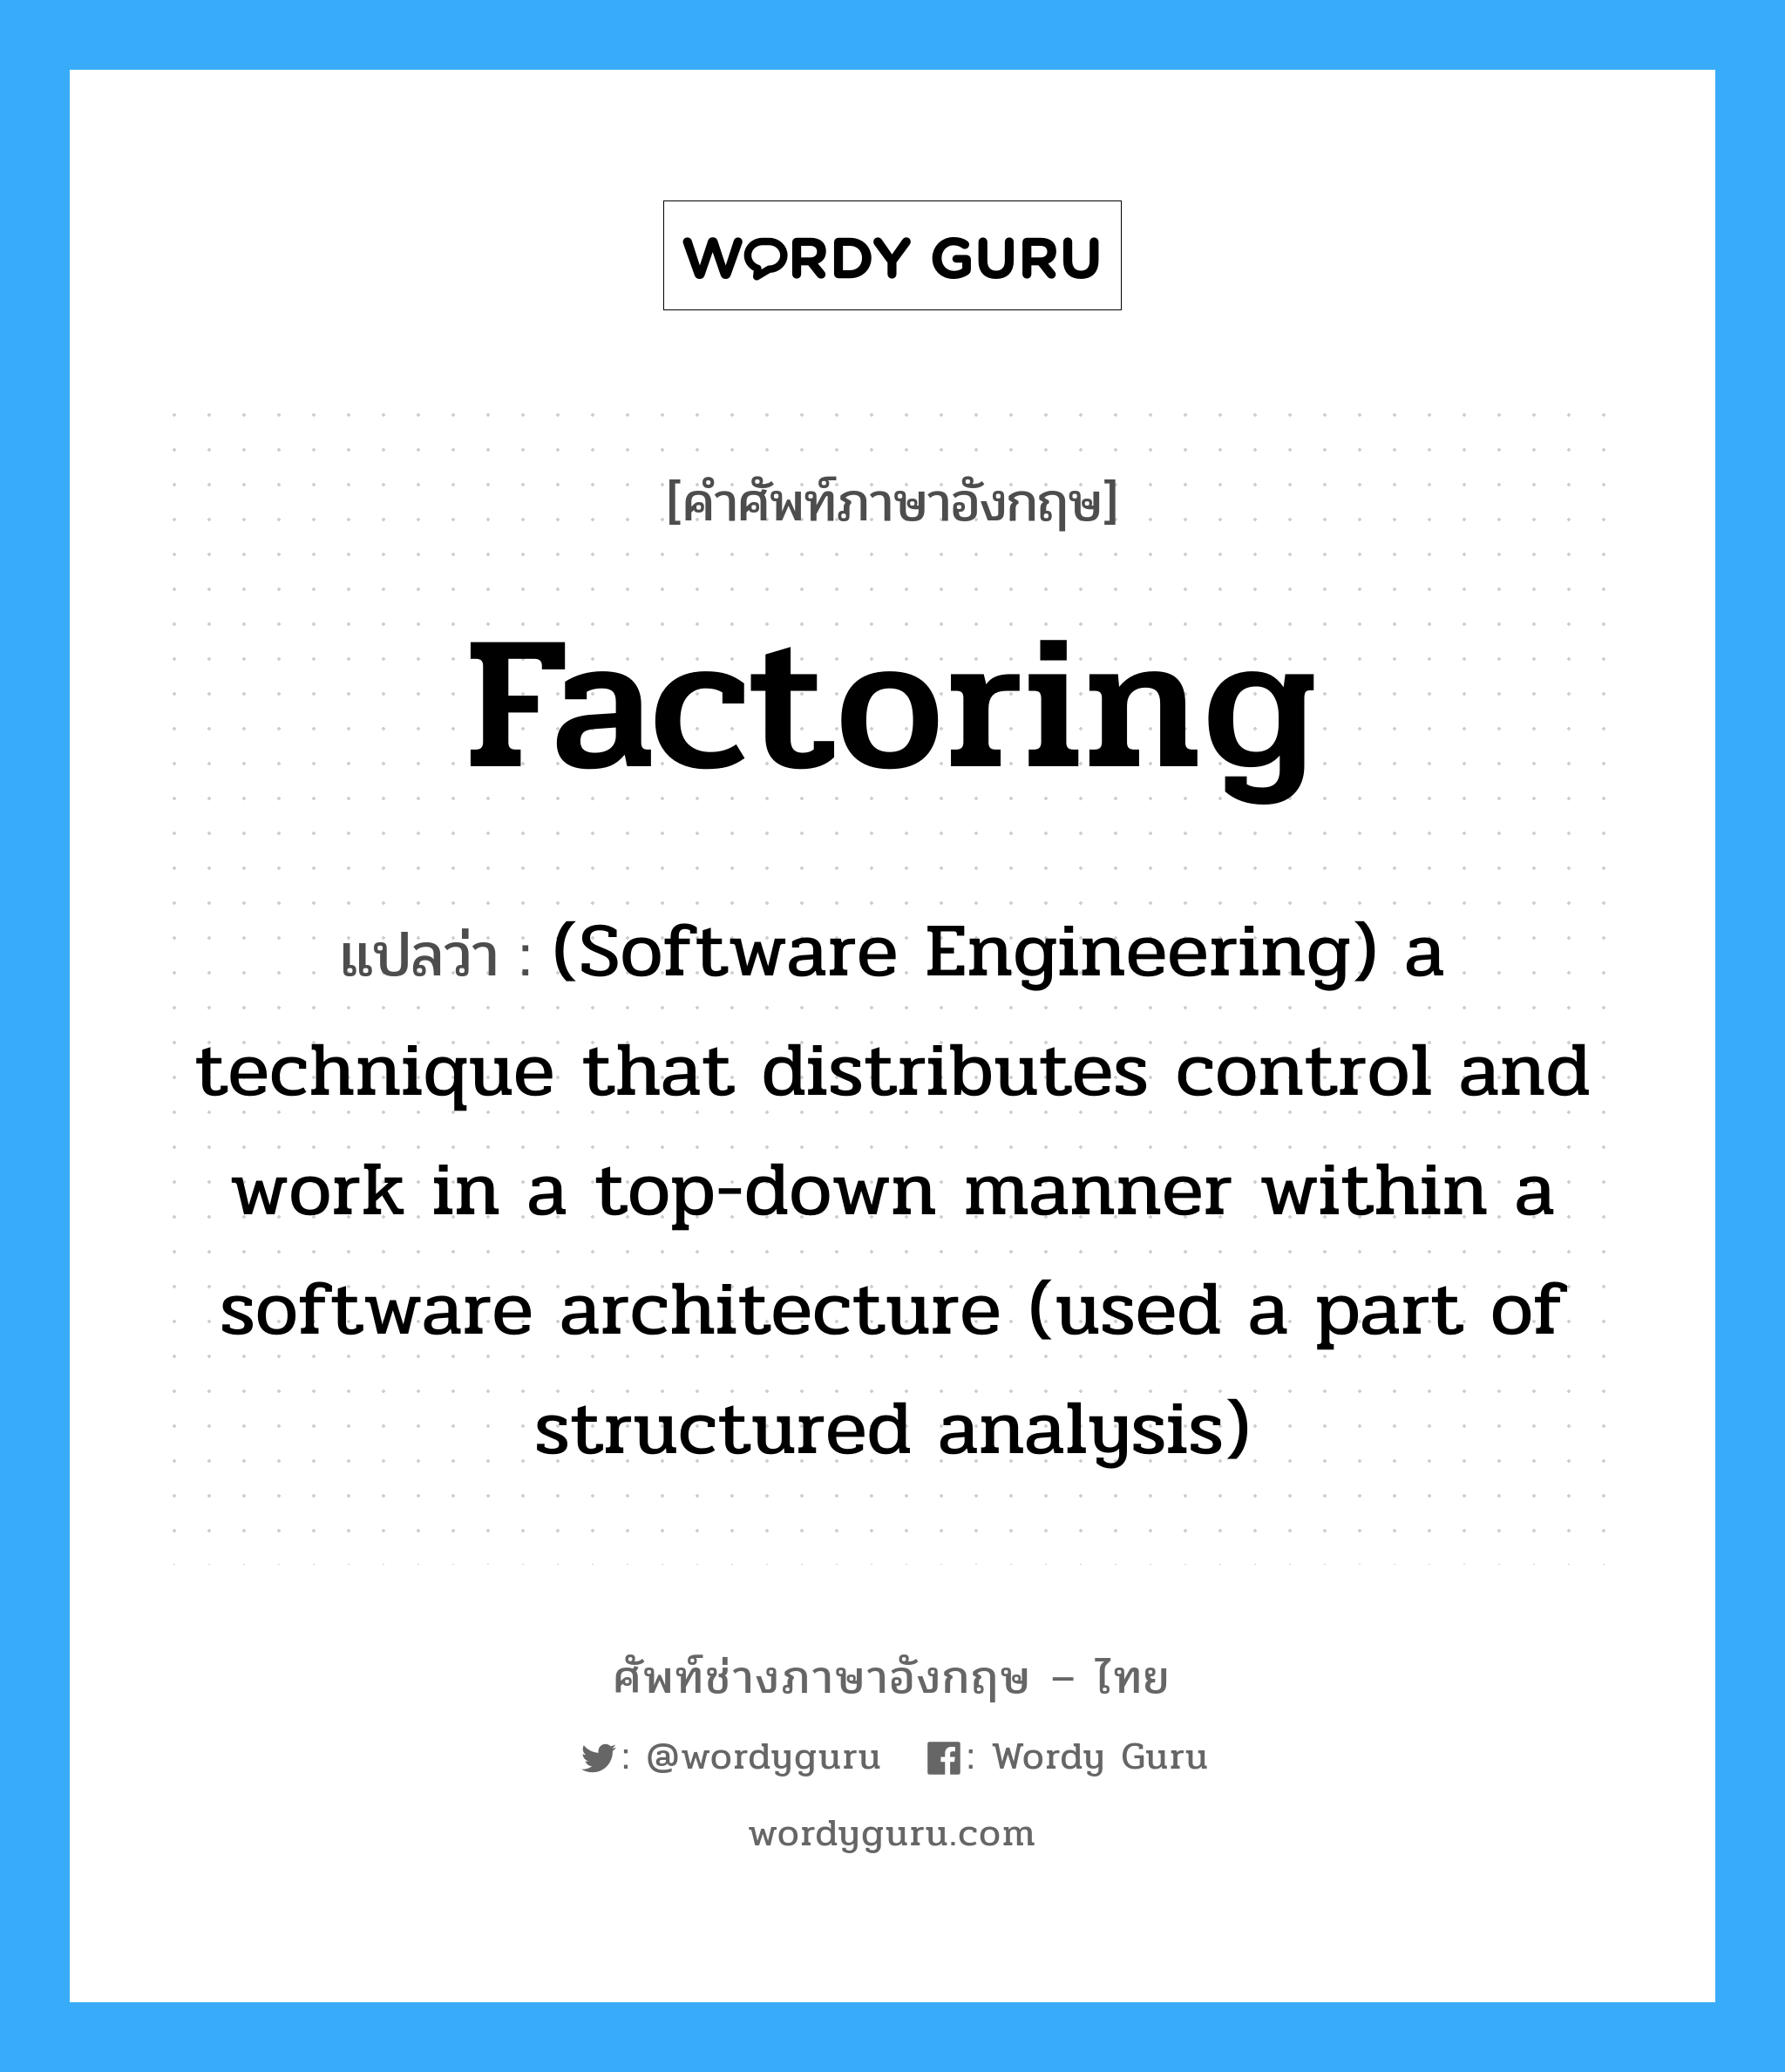 Factoring แปลว่า?, คำศัพท์ช่างภาษาอังกฤษ - ไทย Factoring คำศัพท์ภาษาอังกฤษ Factoring แปลว่า (Software Engineering) a technique that distributes control and work in a top-down manner within a software architecture (used a part of structured analysis)